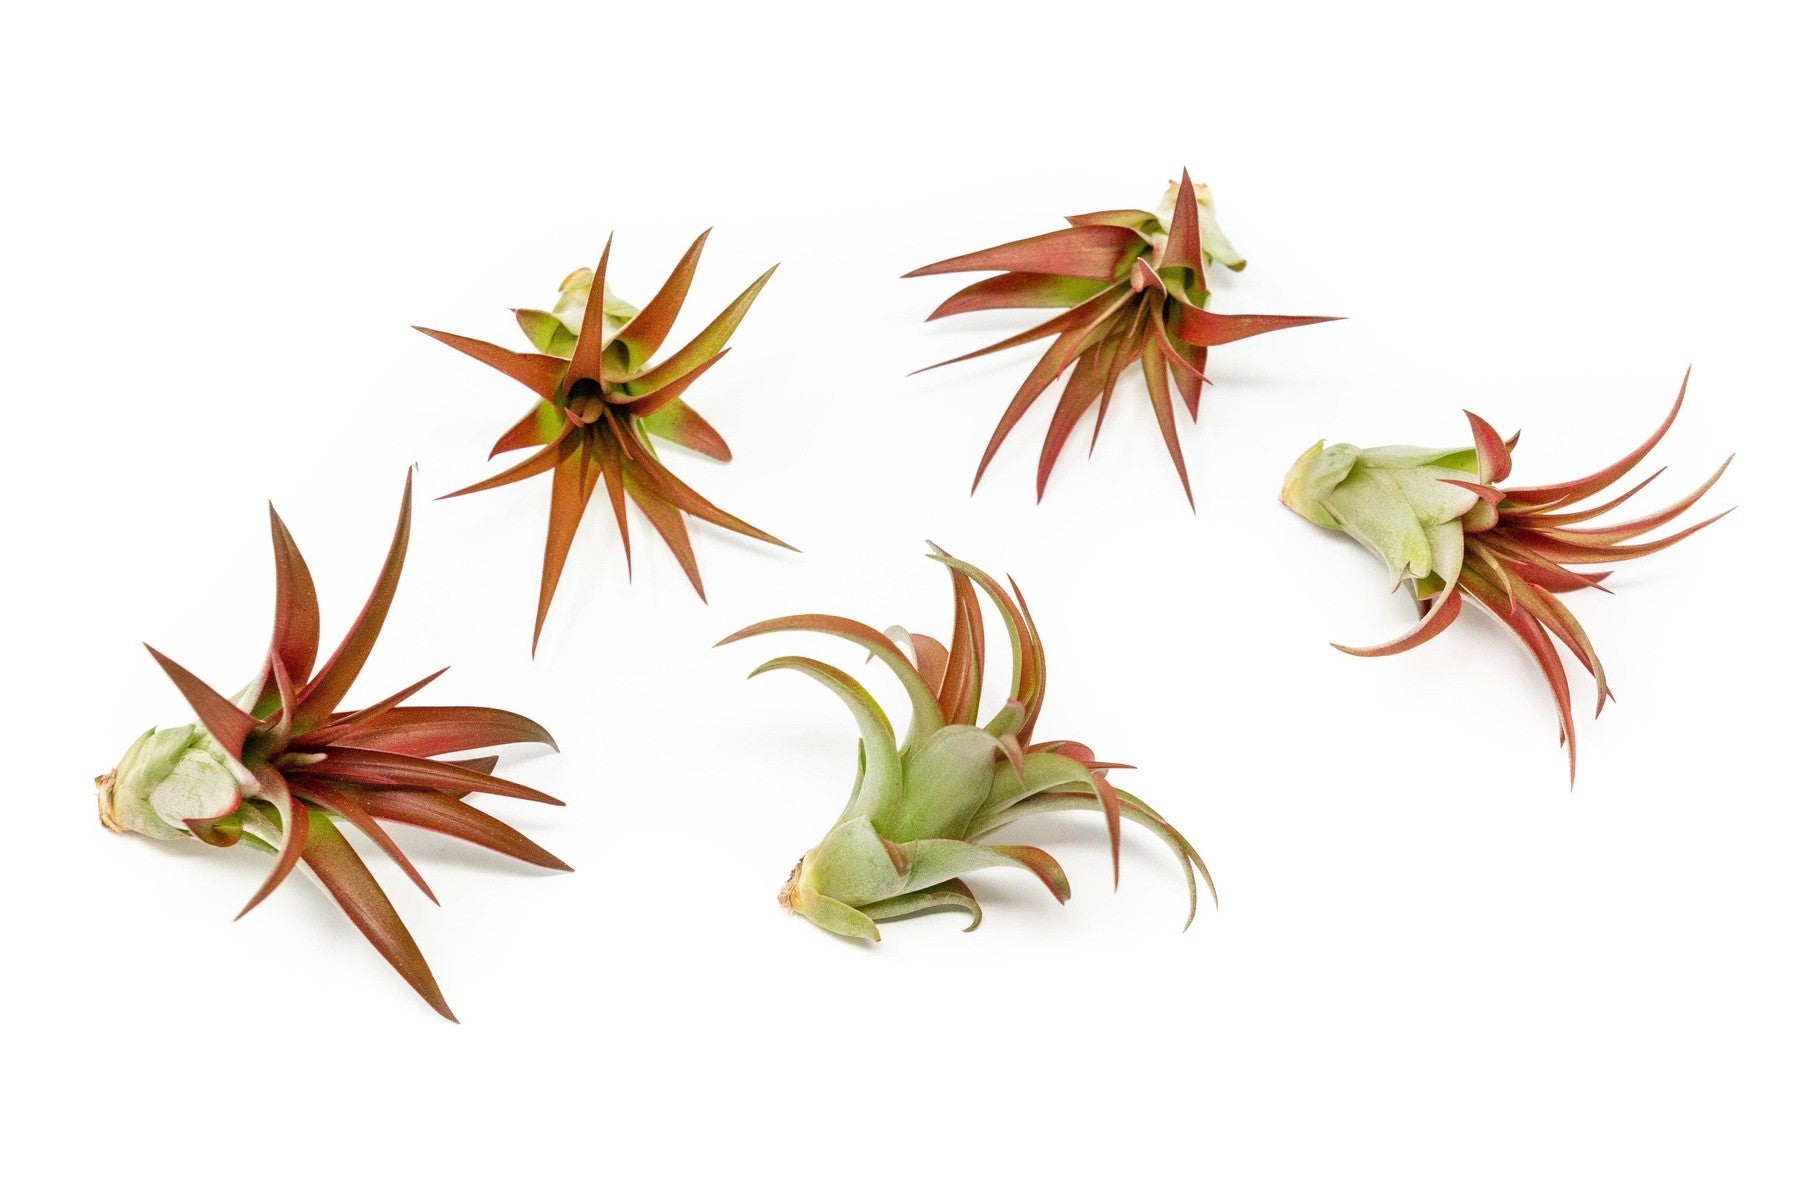 SALE - Tillandsia Red Abdita Air Plants - Set of 10 or 20 - 50% Off-airplant-The Succulent Source